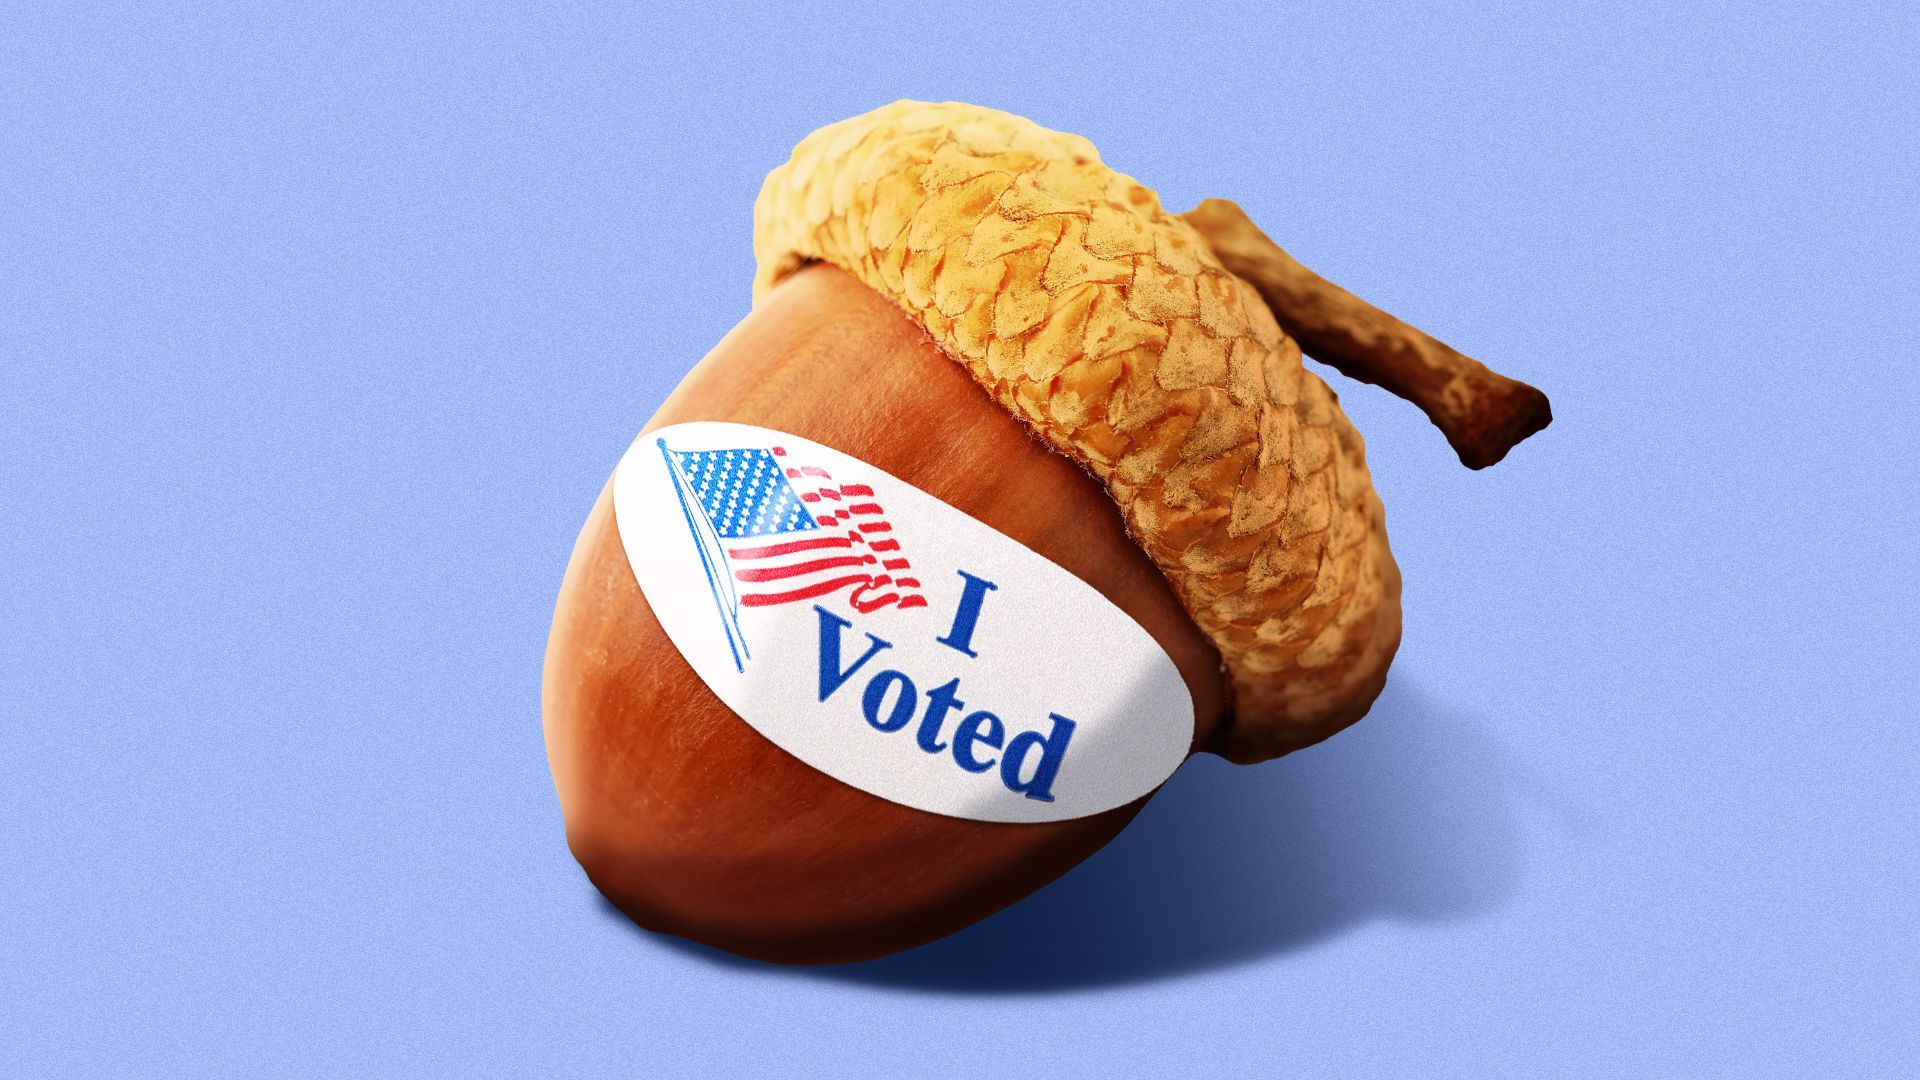 Illustration of an acorn with an "I Voted" sticker